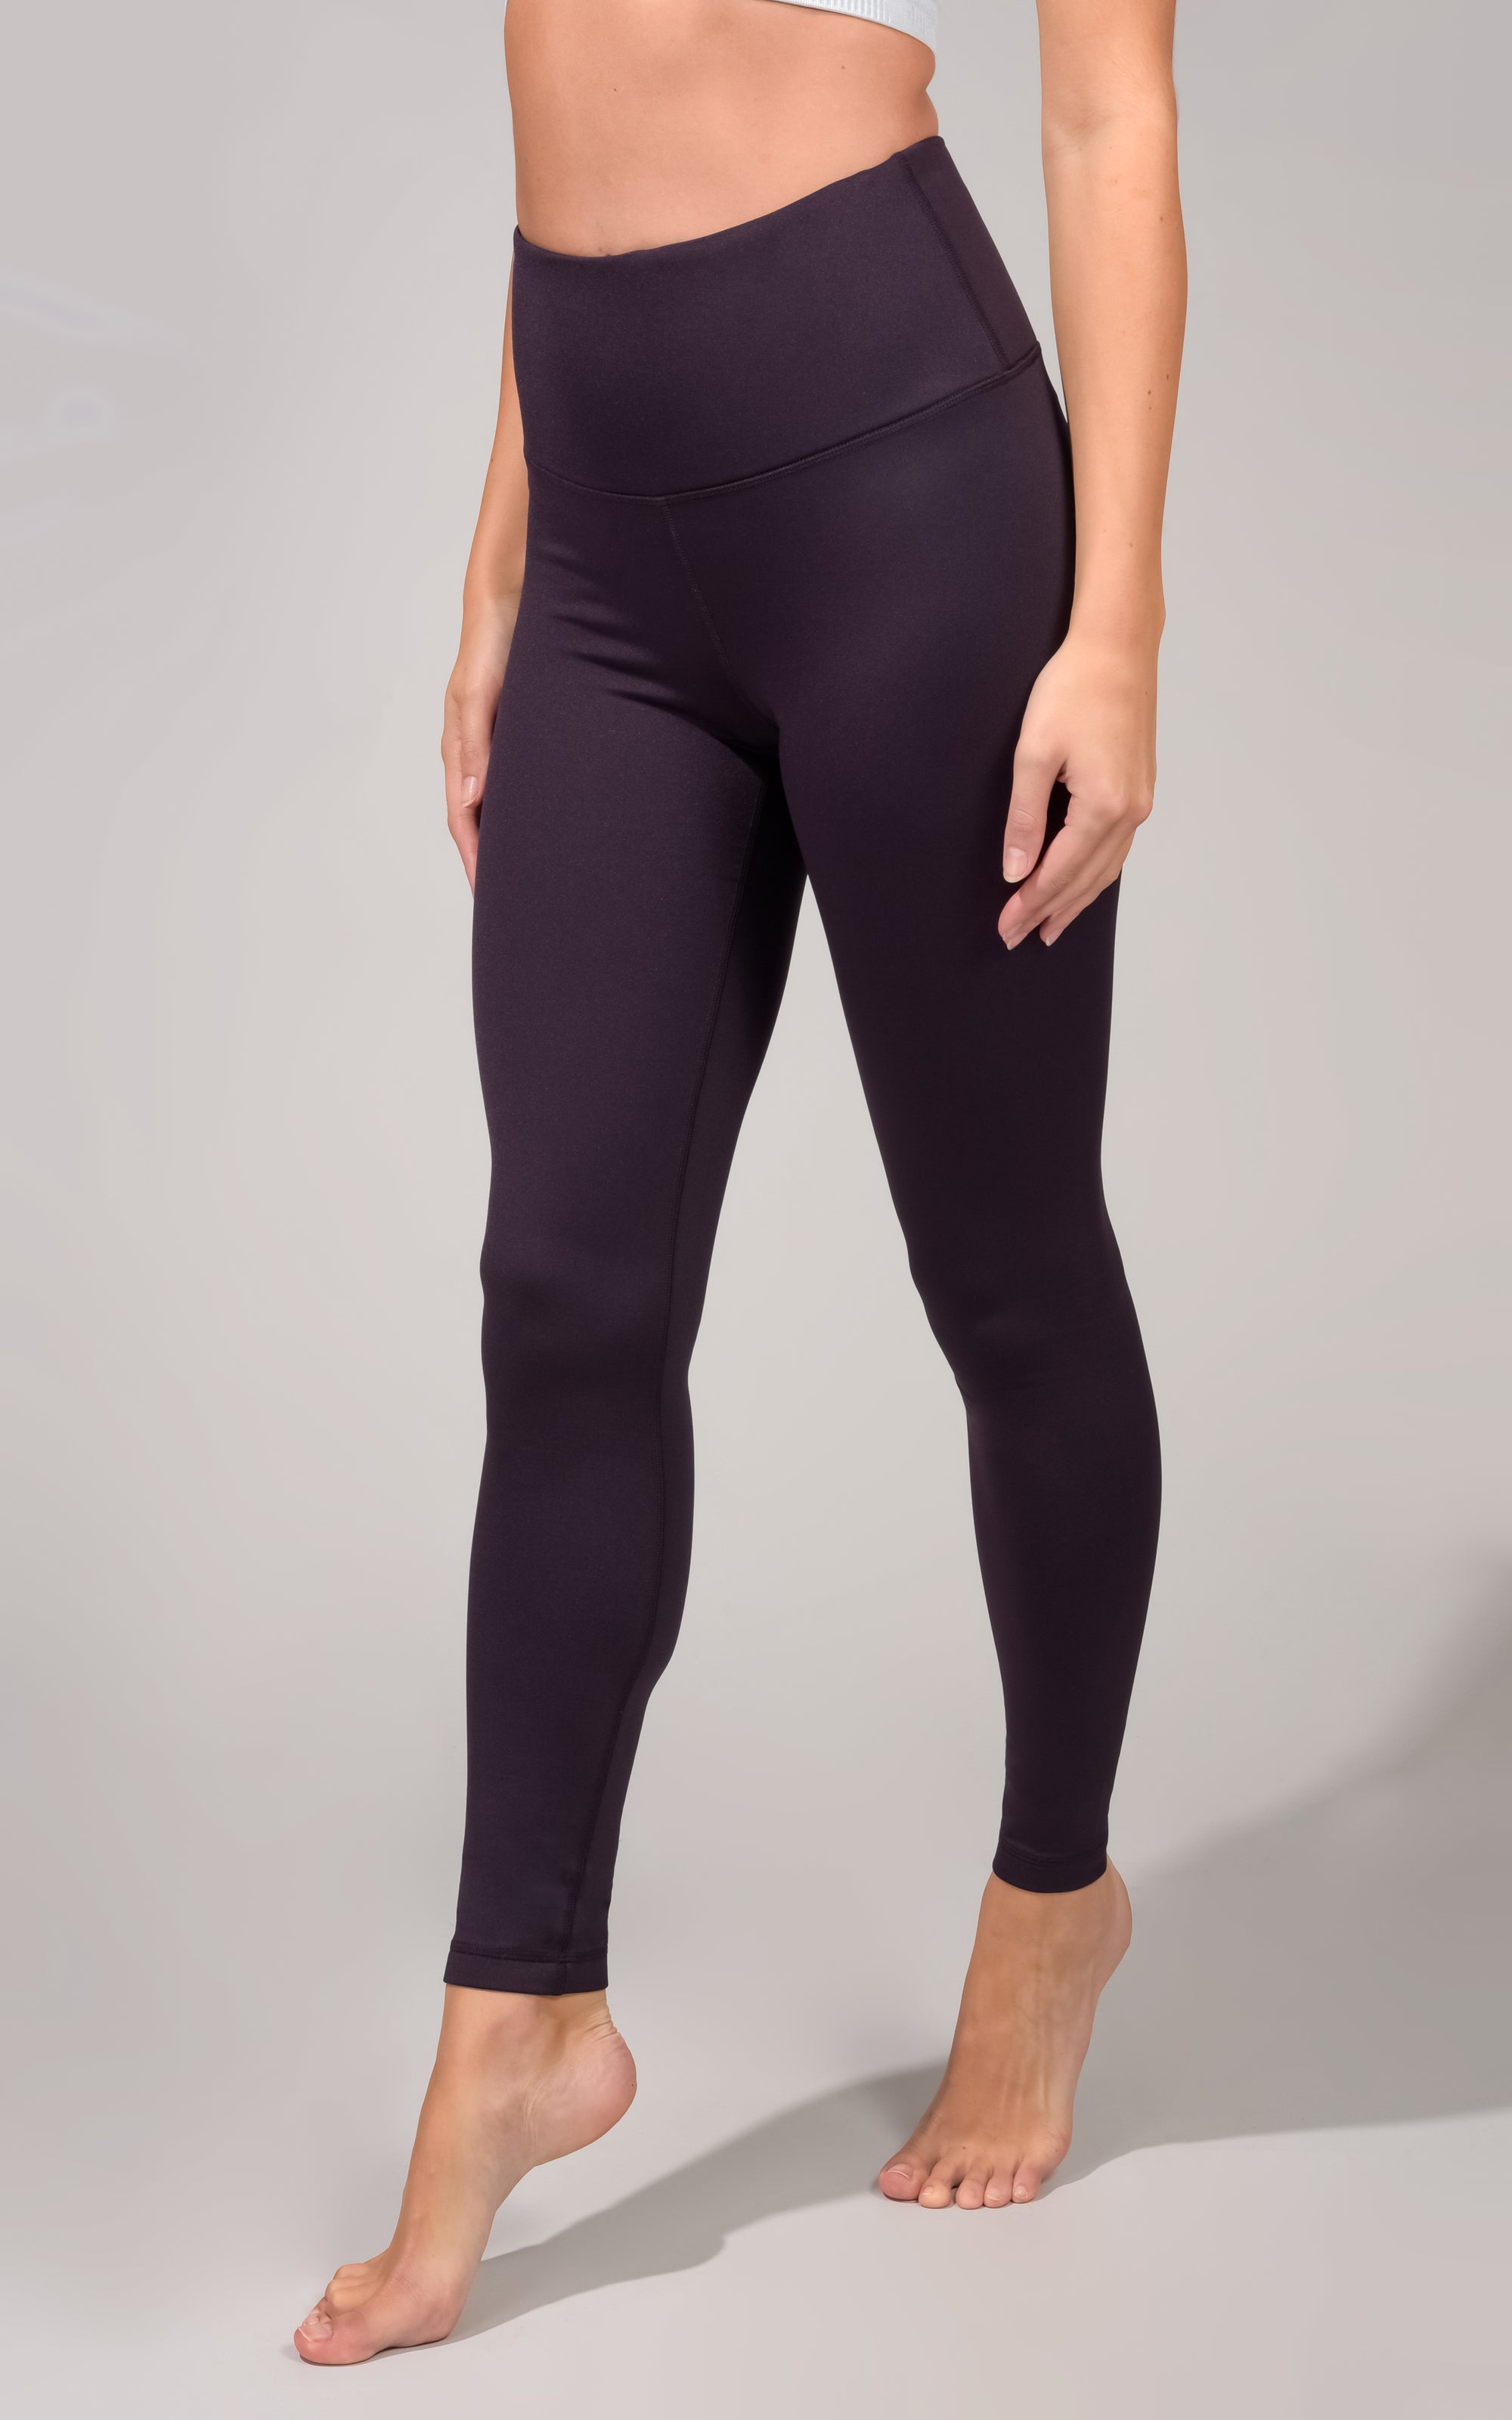  90 Degree By Reflex - Womens Soft and Comfy Brushed